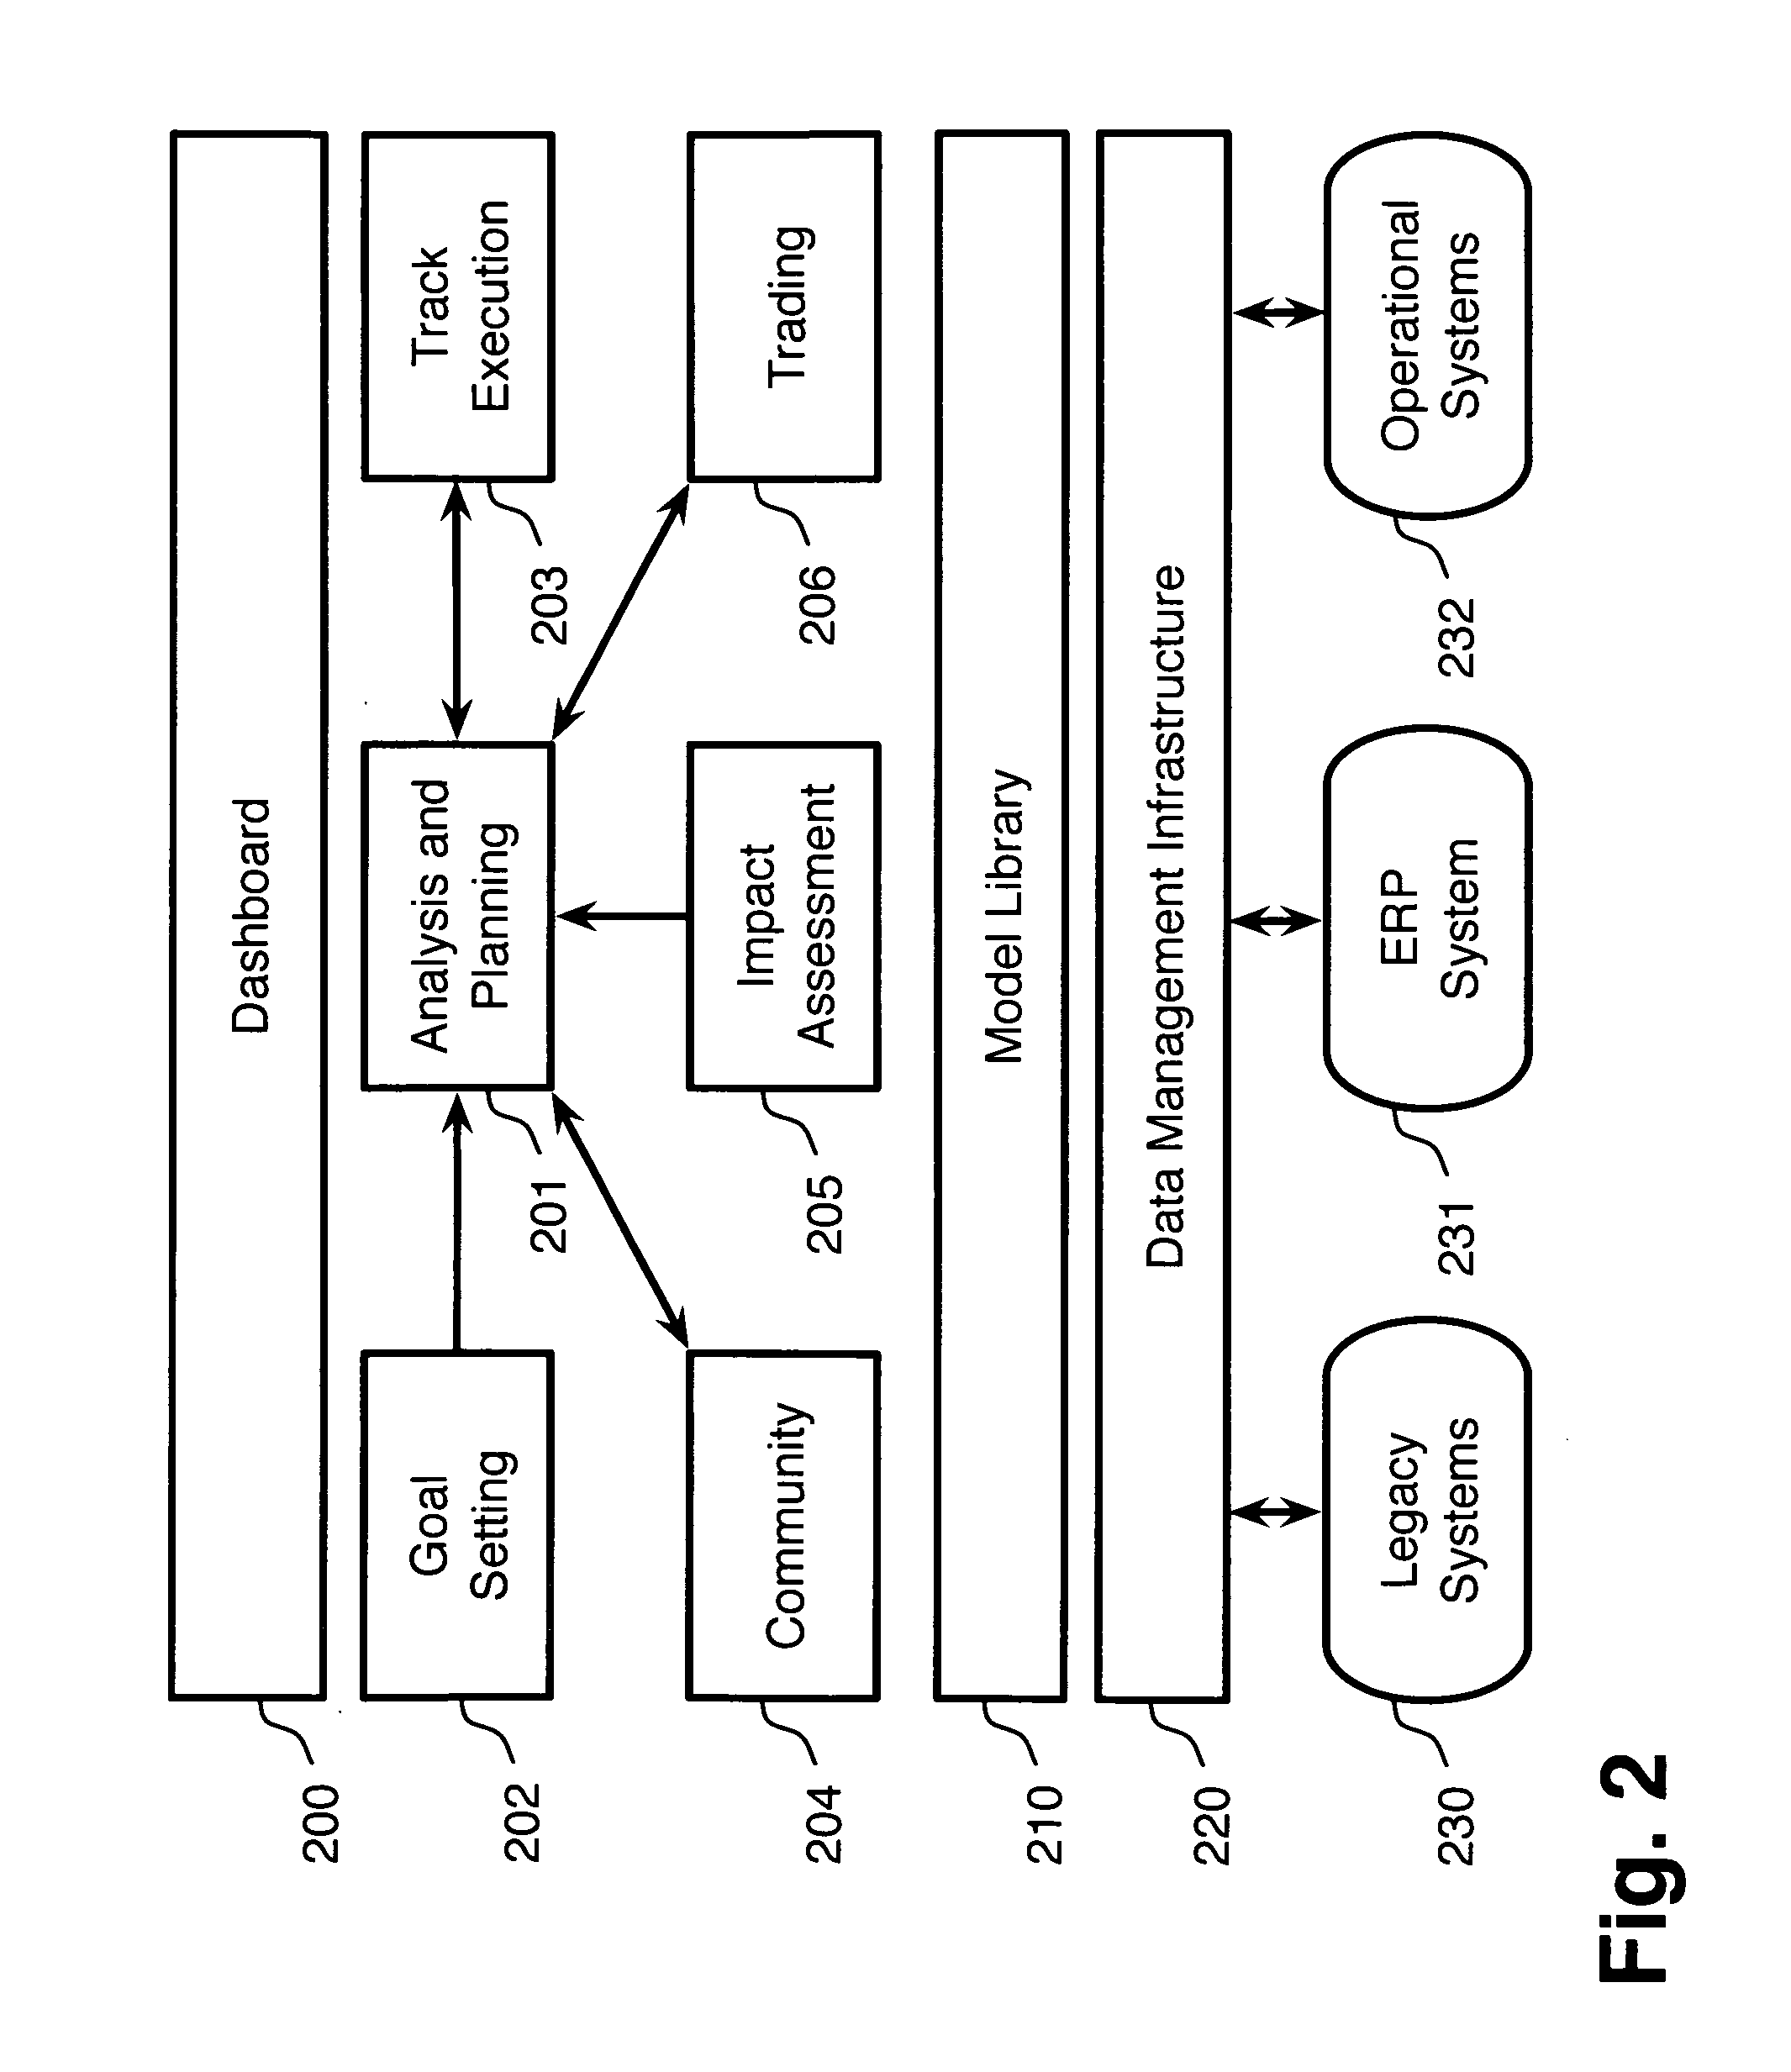 System and method for energy performance management